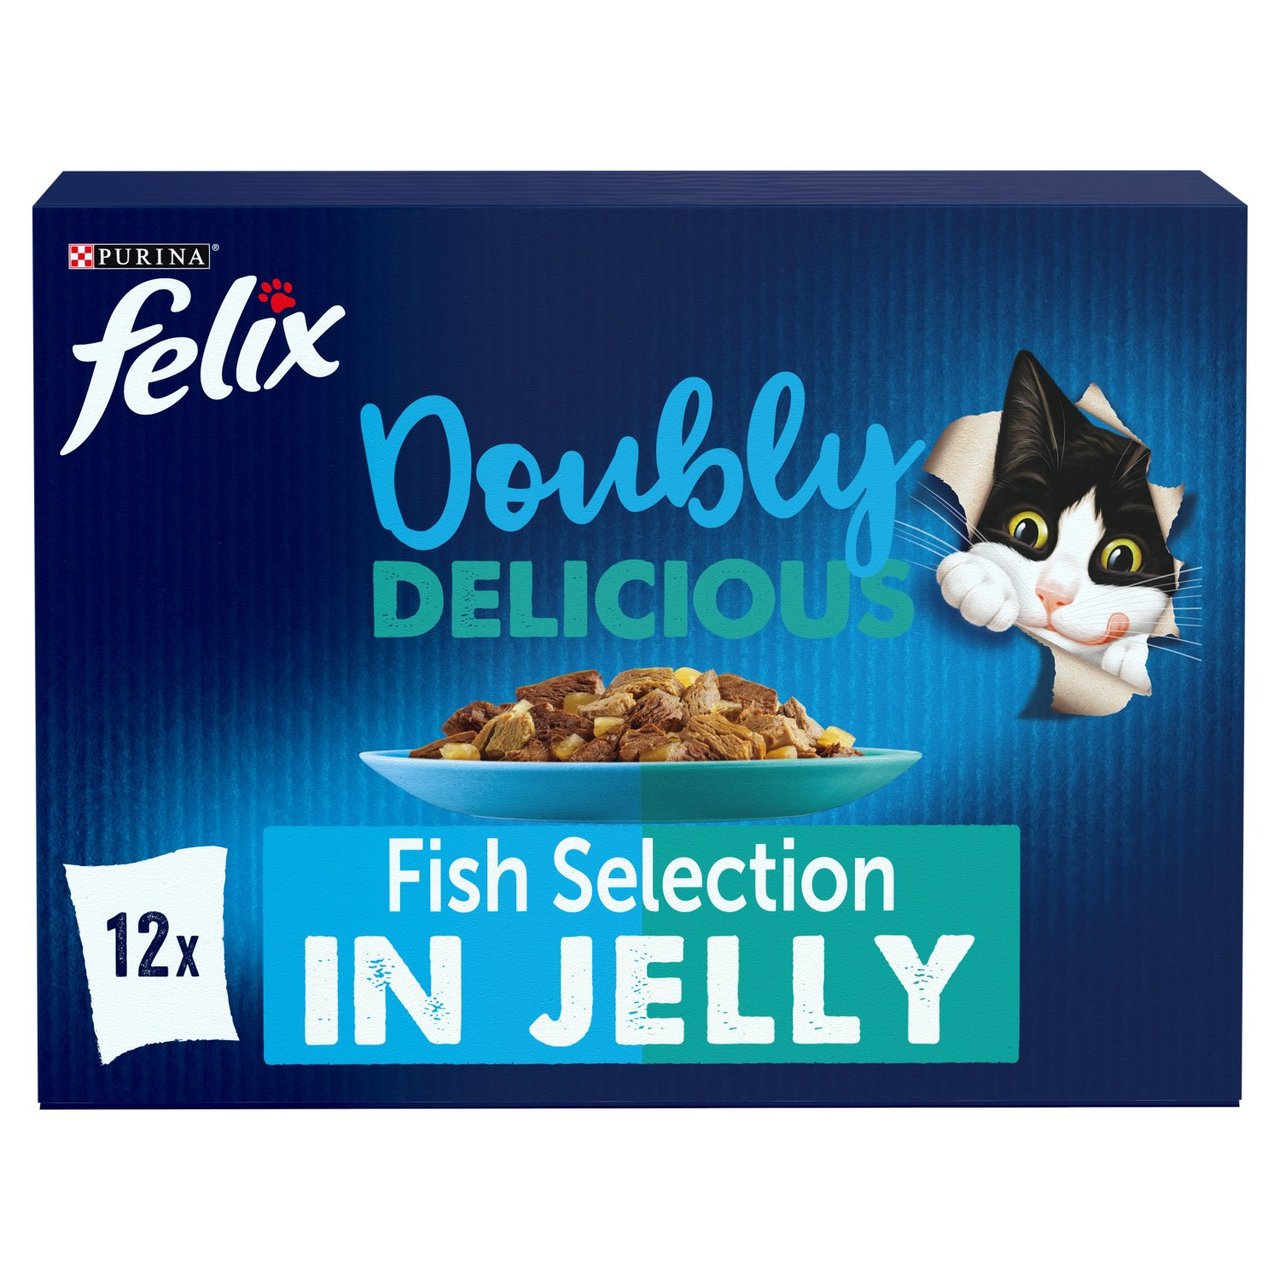 An image of Felix As Good As It Looks Doubly Fish in Jelly